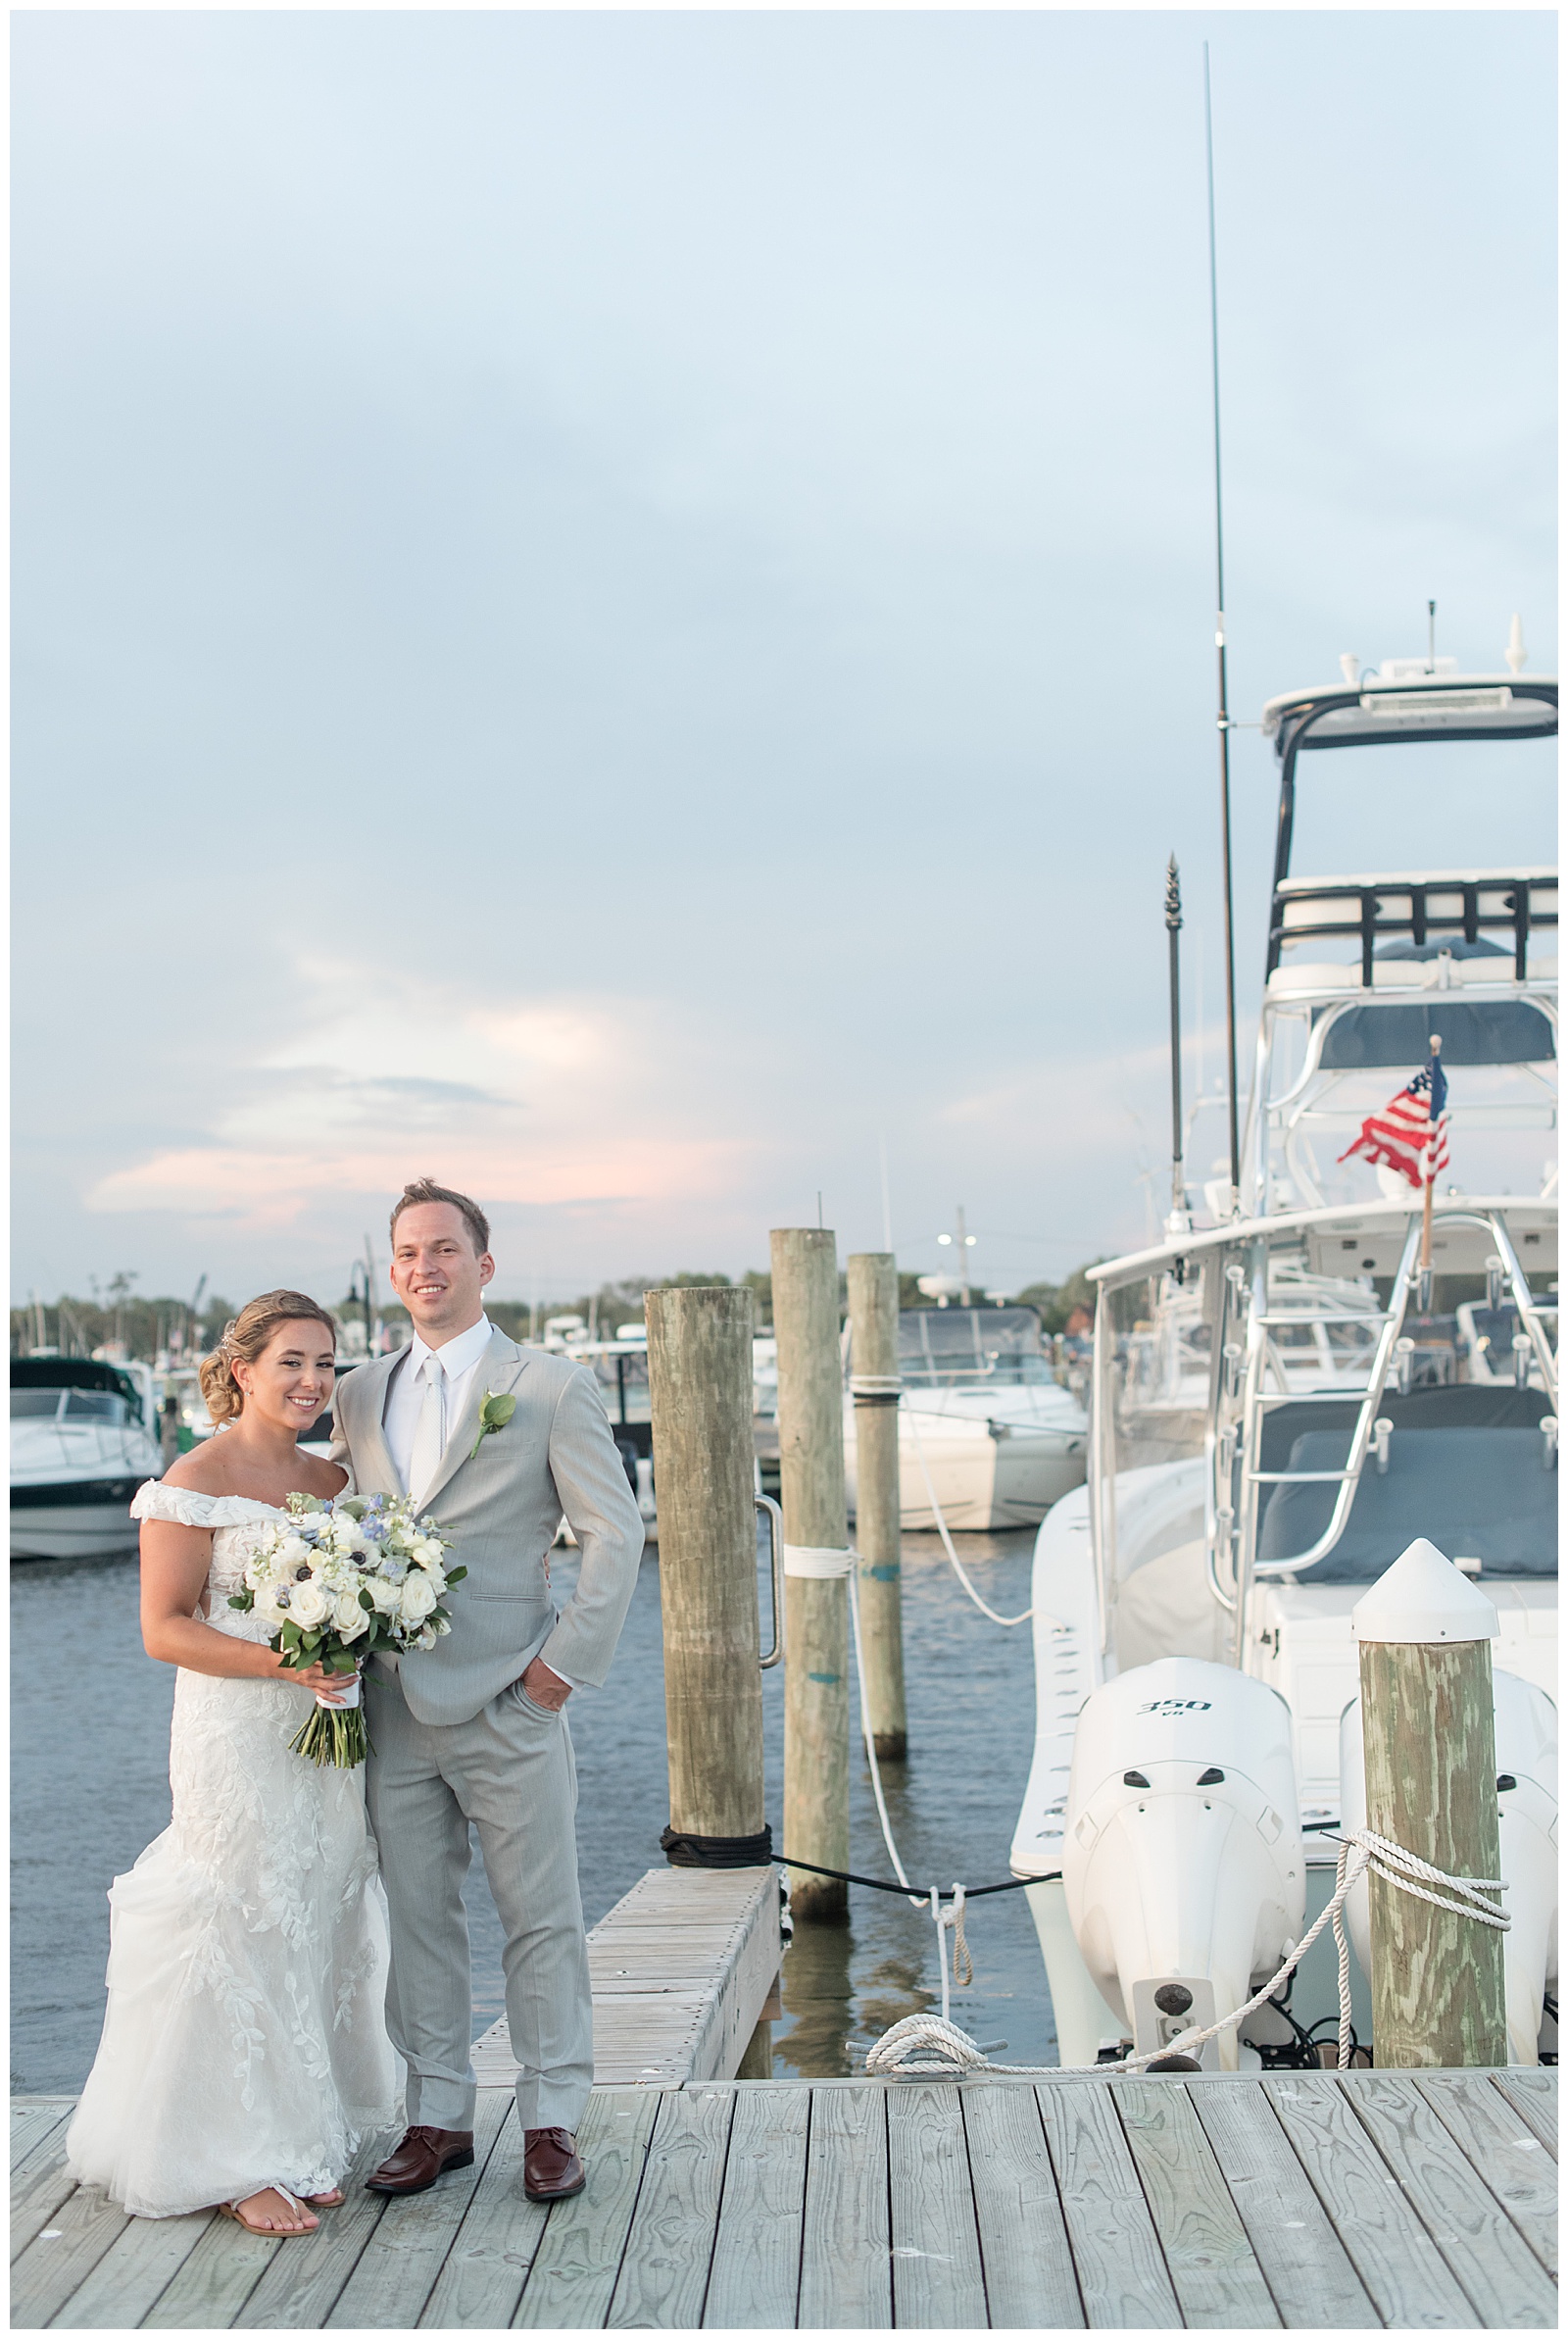 couple standing on dock by large boat at sunset on summer wedding day in bay shore new york